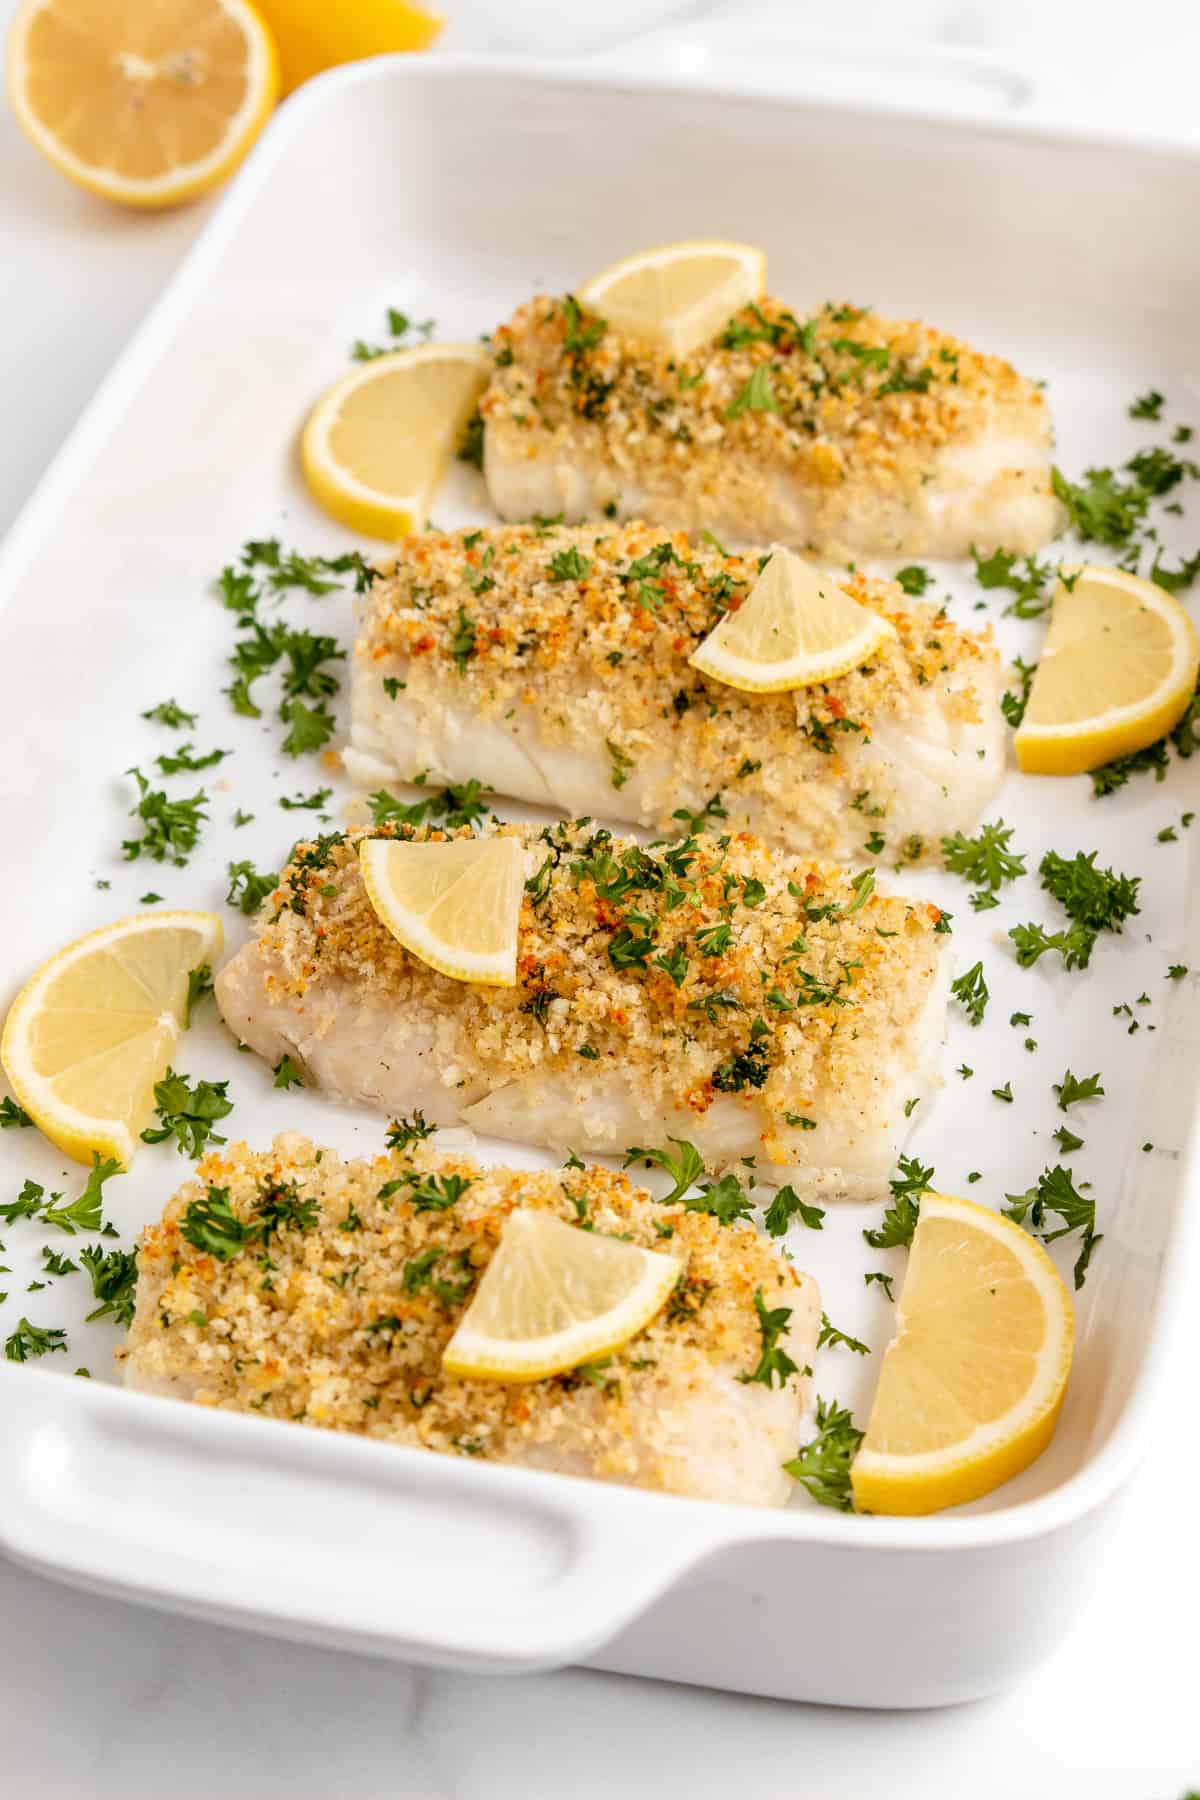 Up close view of panko coated baked cod fillets with lemon and parsley in a baking dish.